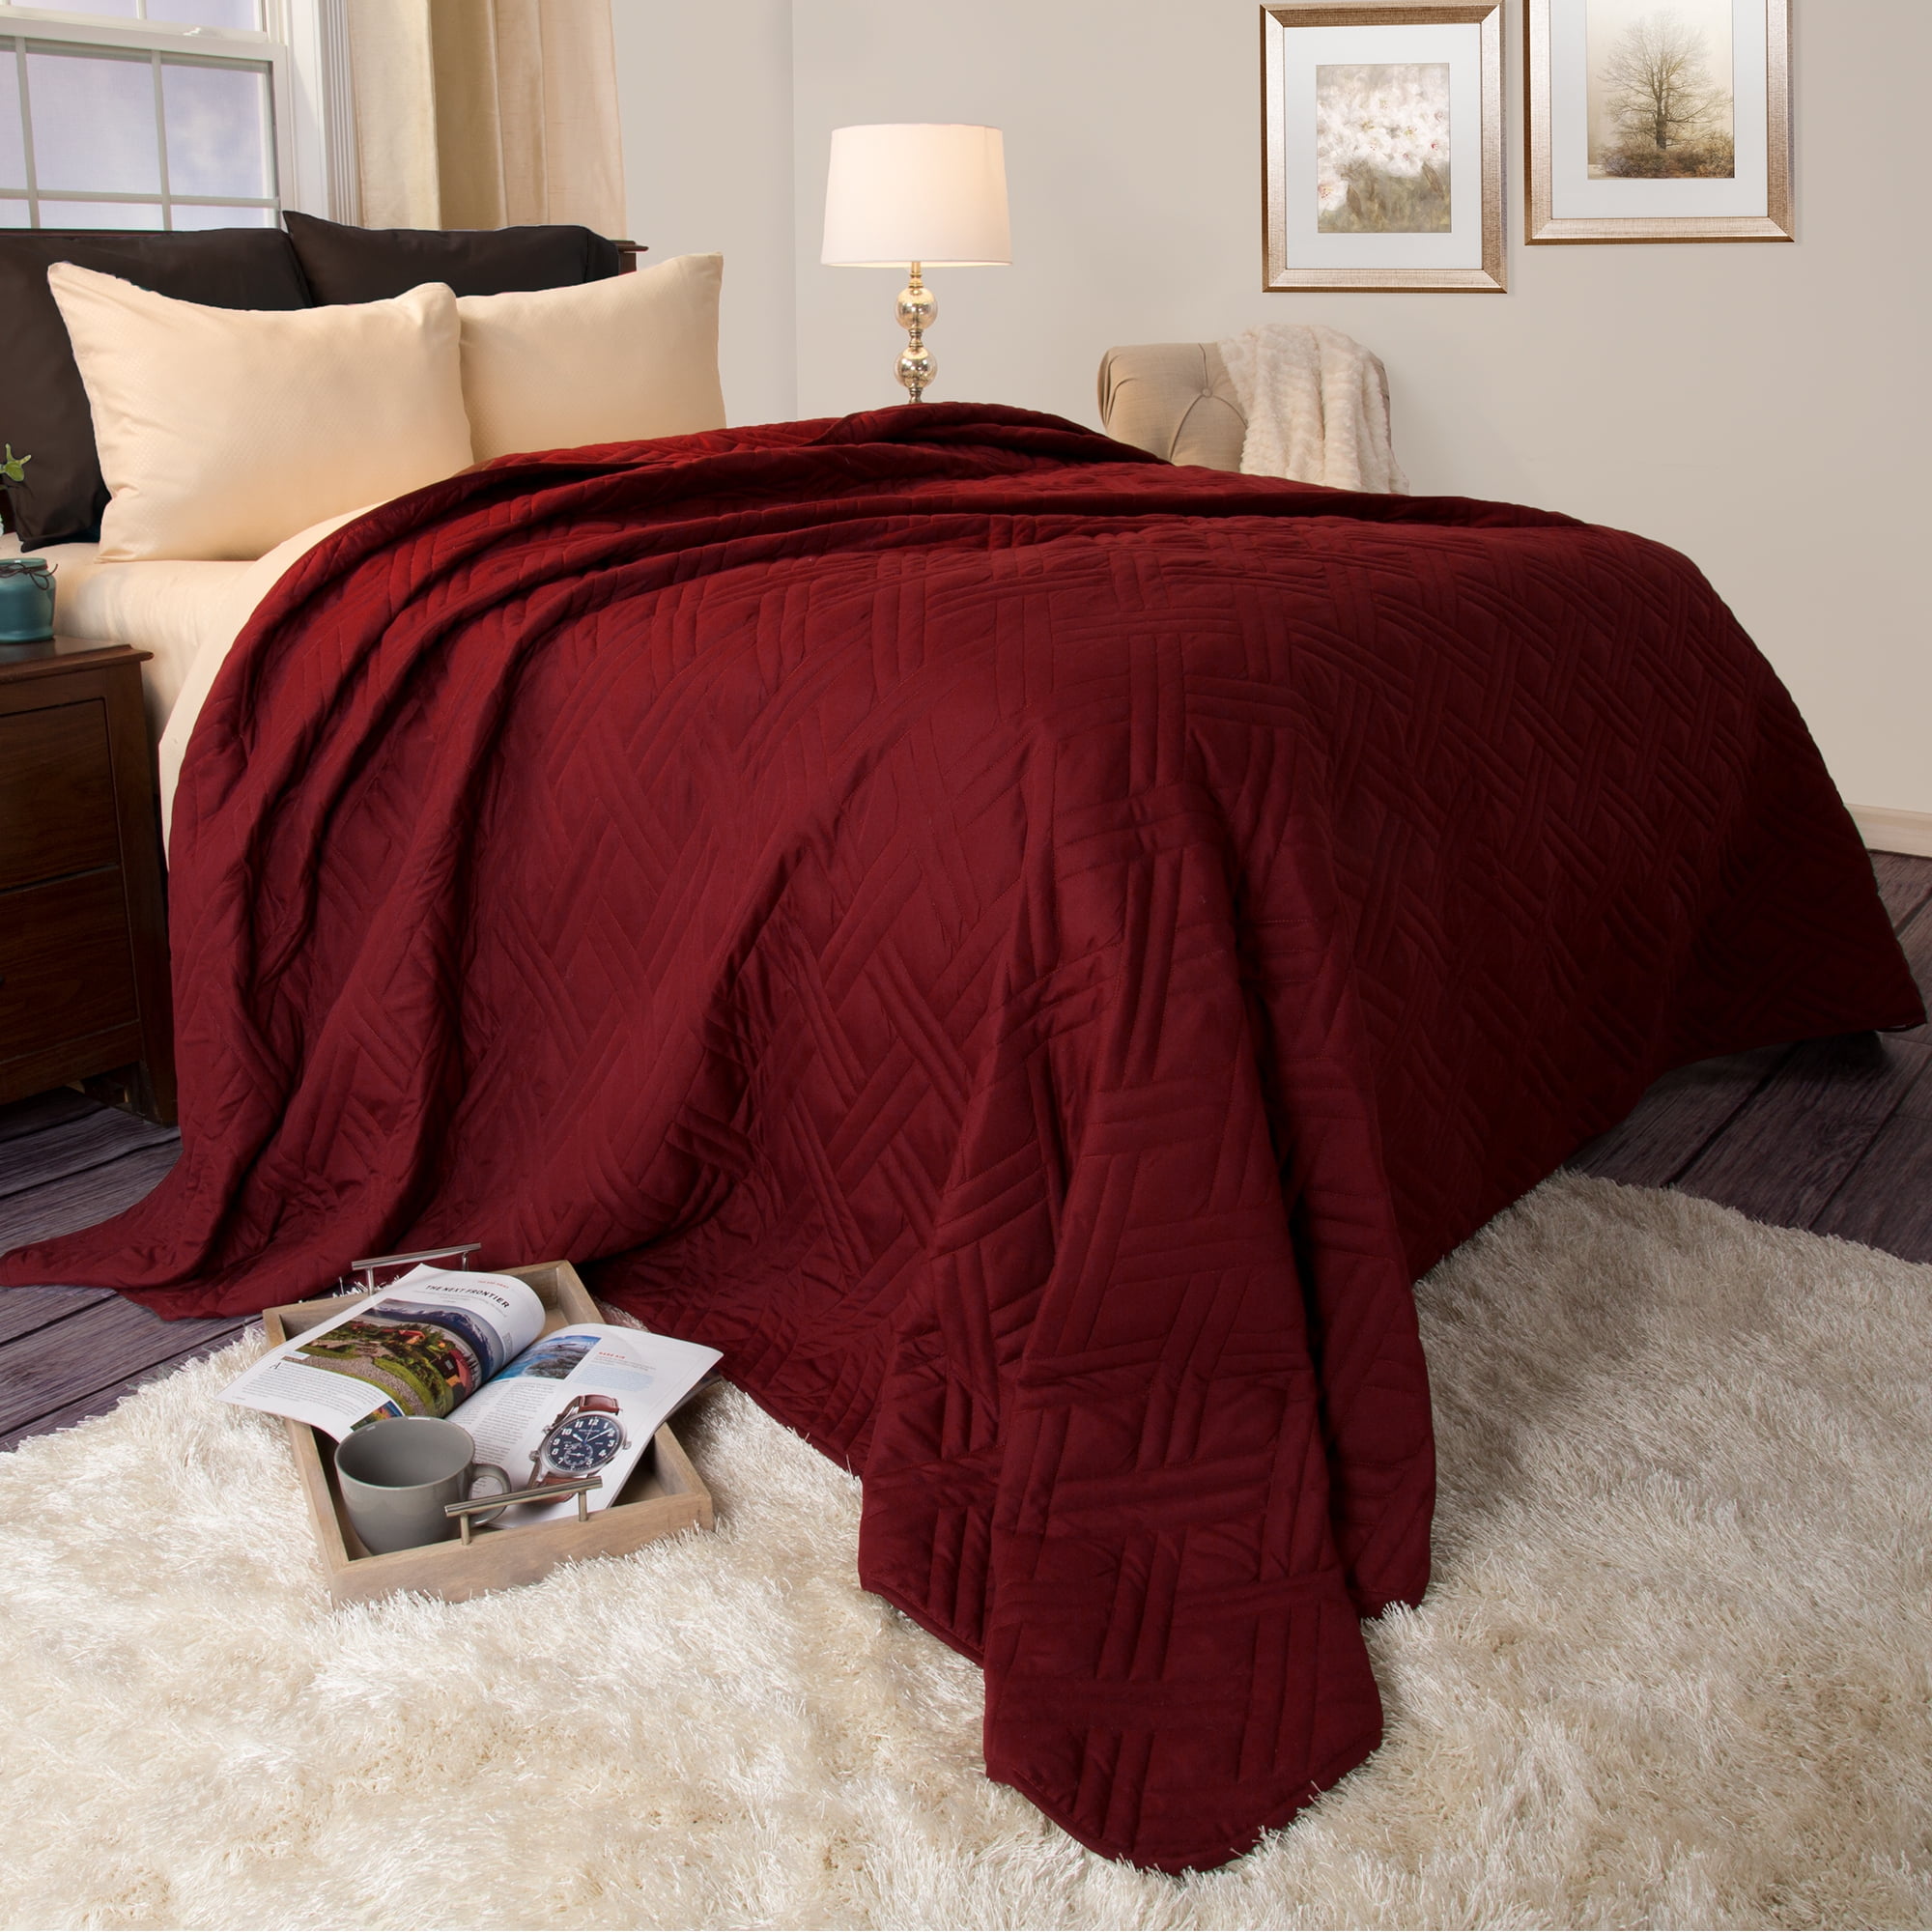 Details about   Glorious Bedding Egyptian Cotton Drop Length Bed Skirt US Full XL Size All Color 